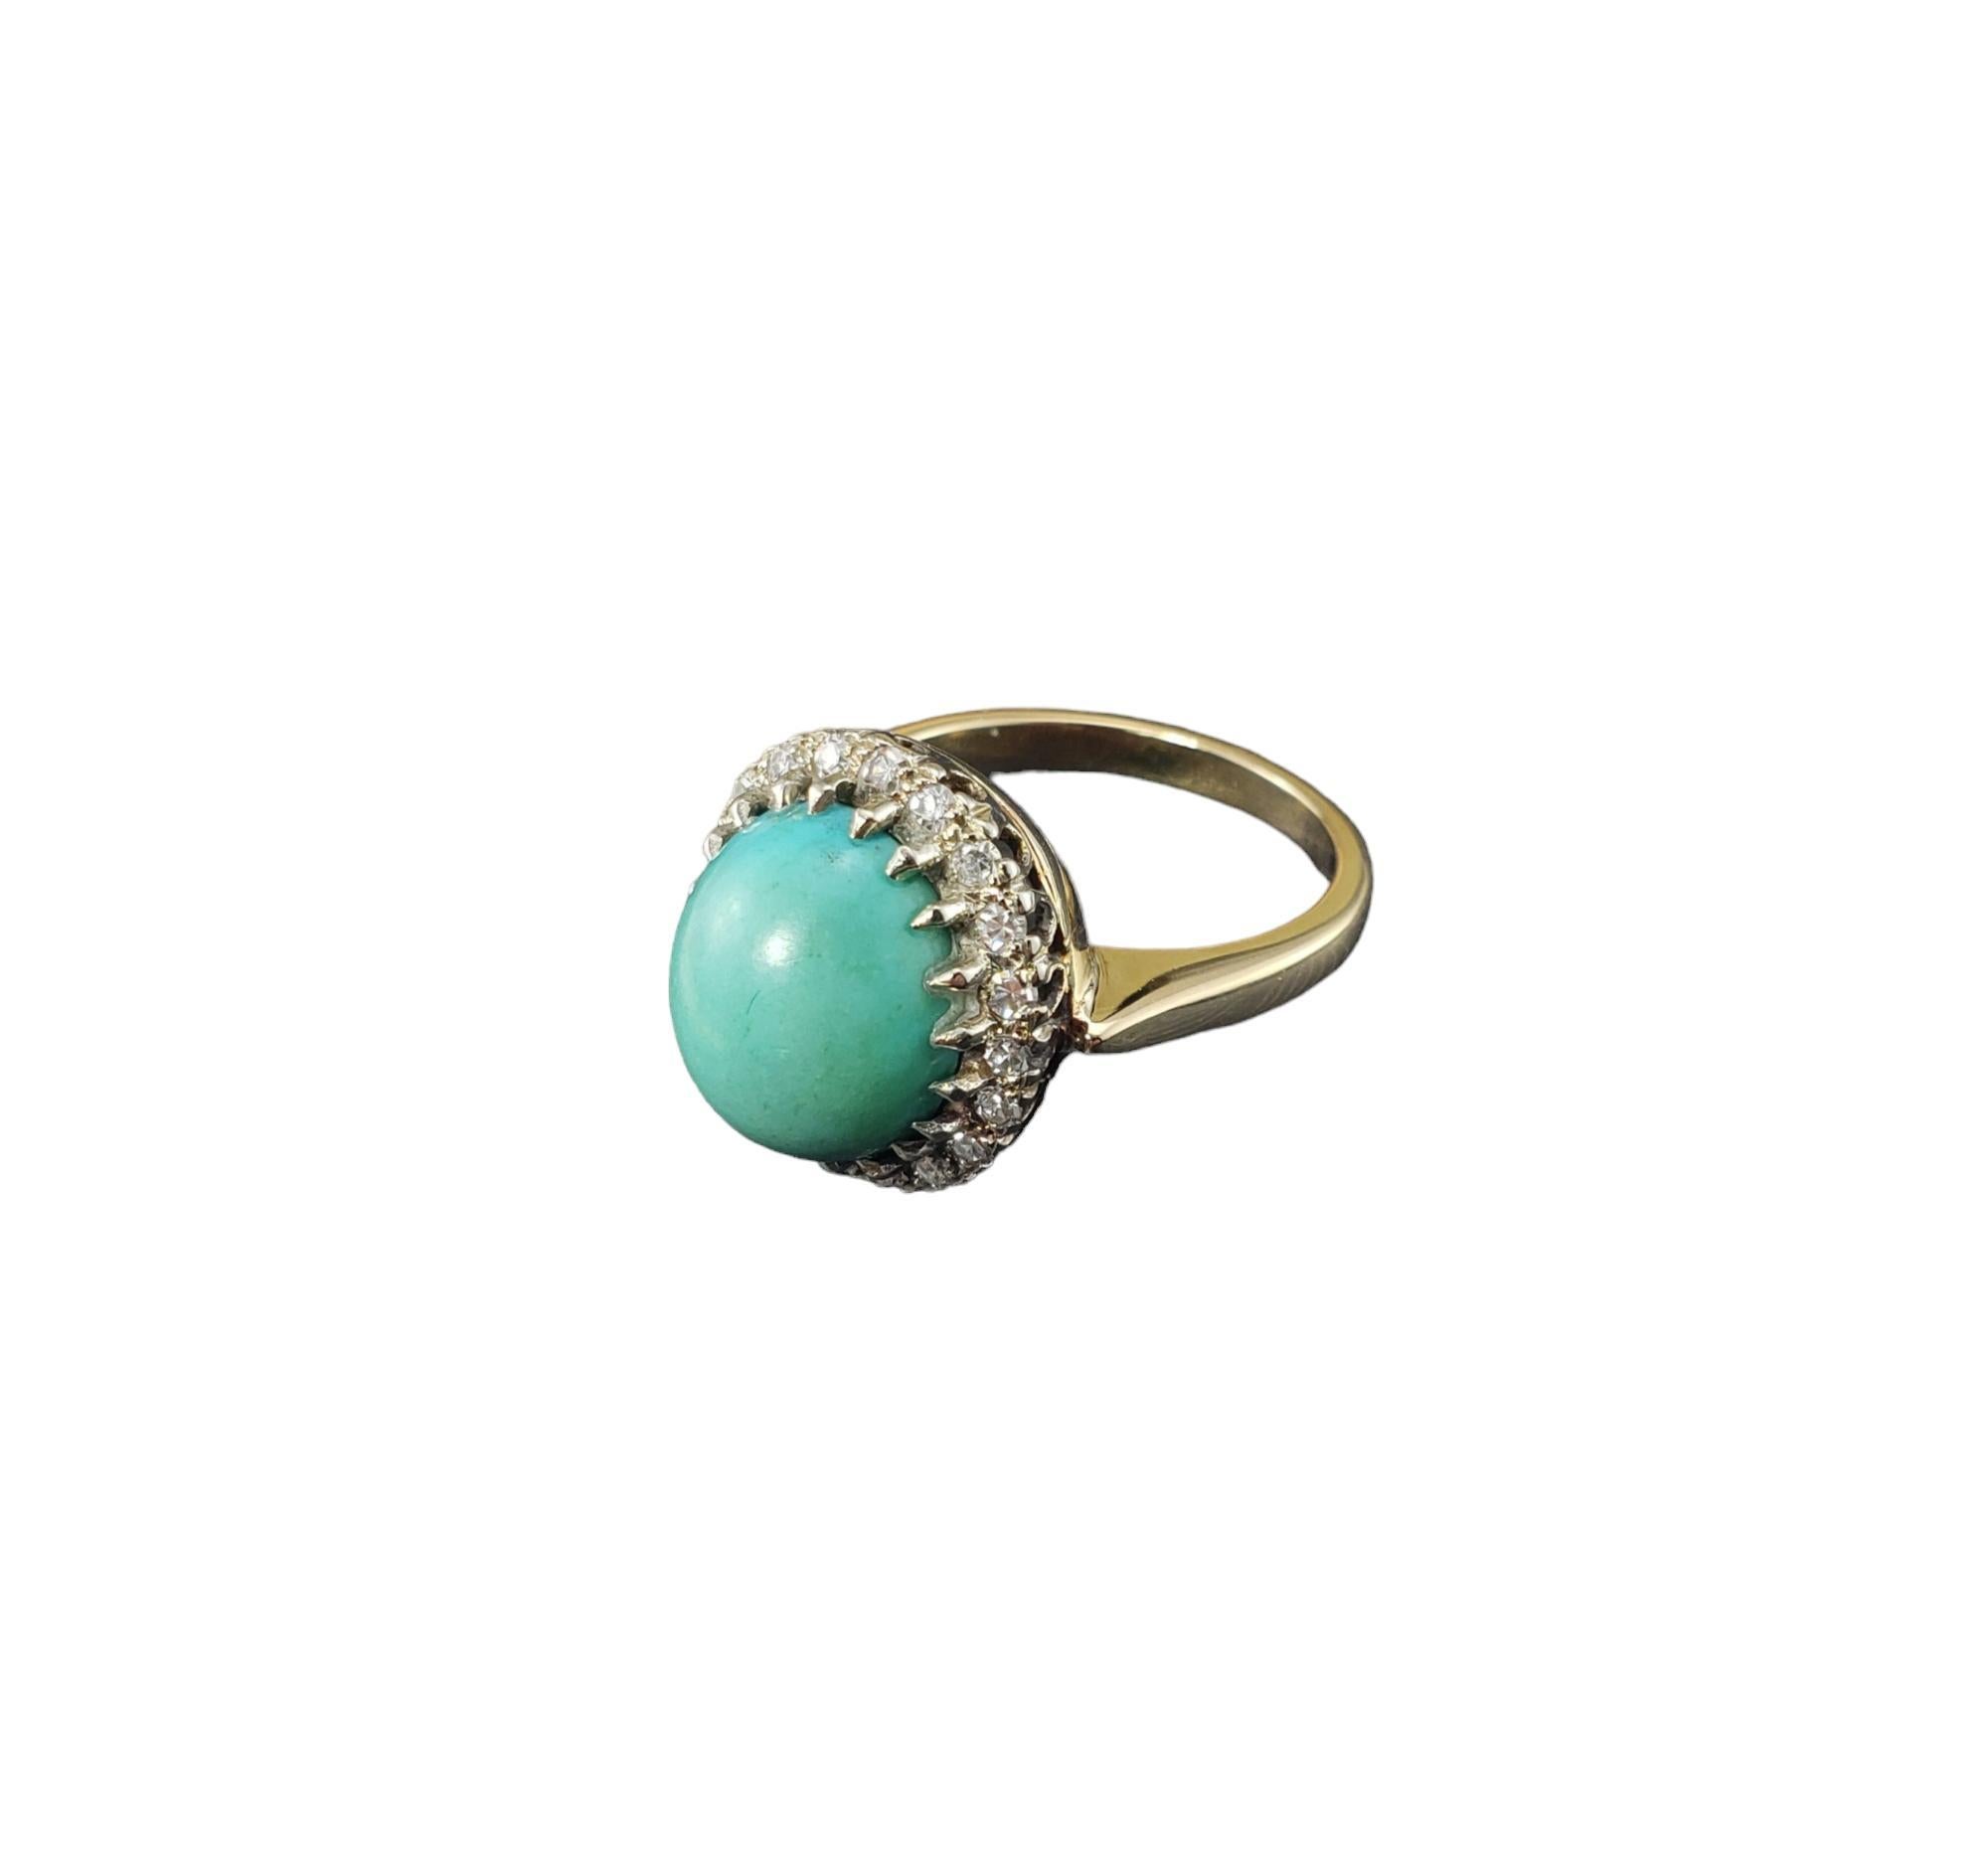 Cabochon 14K Yellow Gold Turquoise & Diamond Ring Size 6.5-6.75  #17060 For Sale